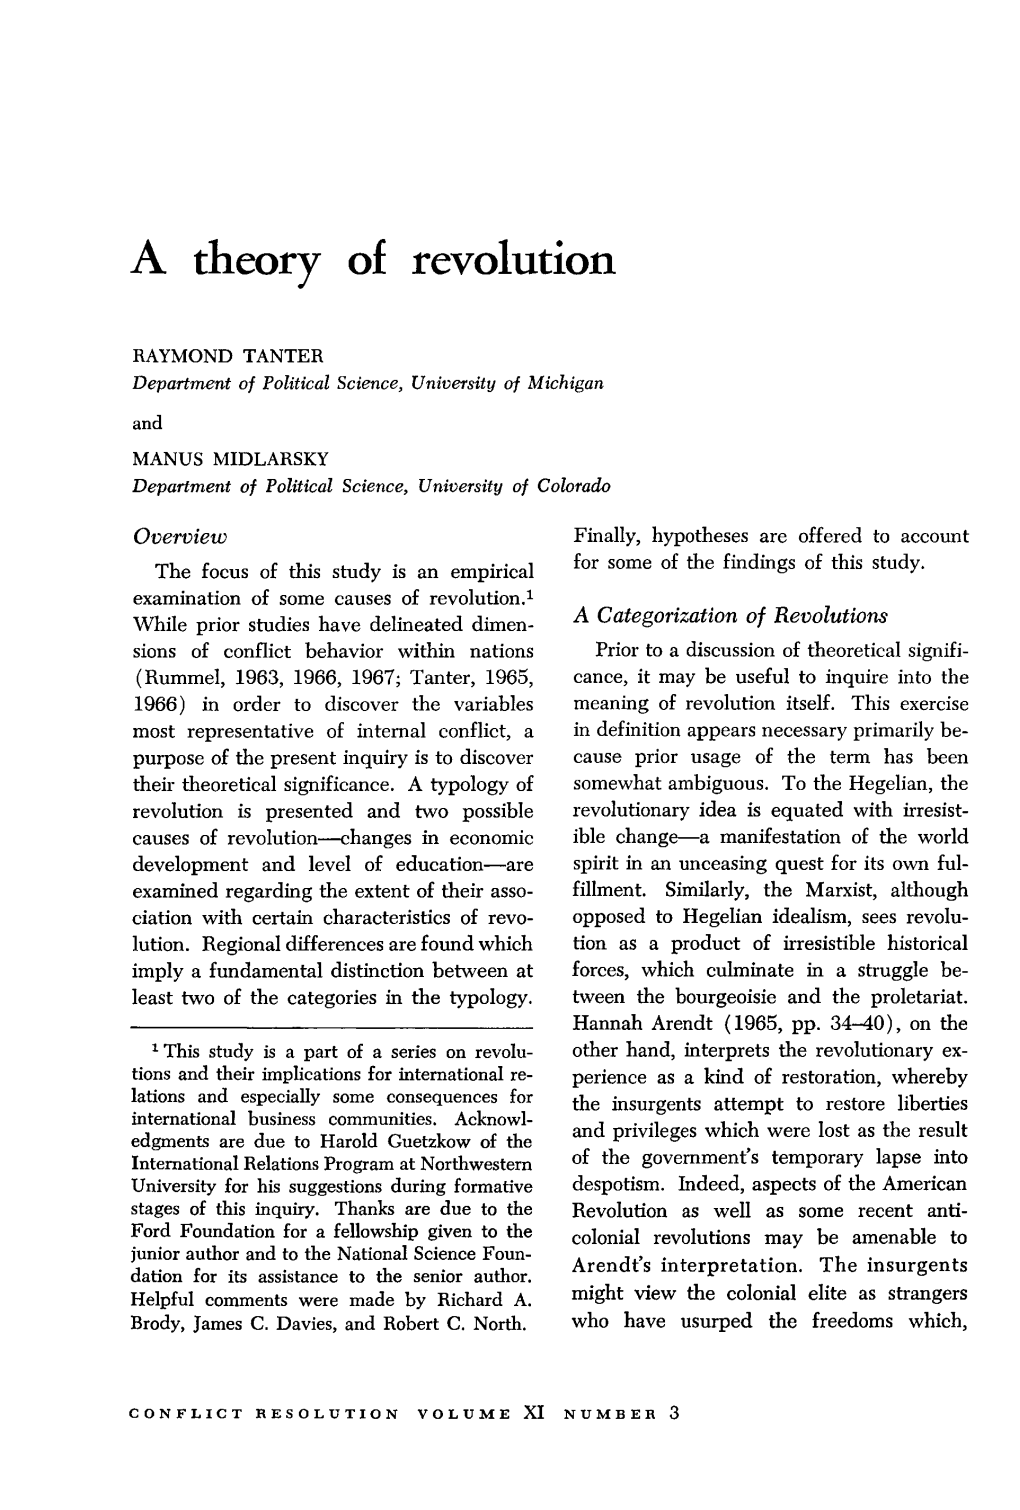 A Theory of Revolution